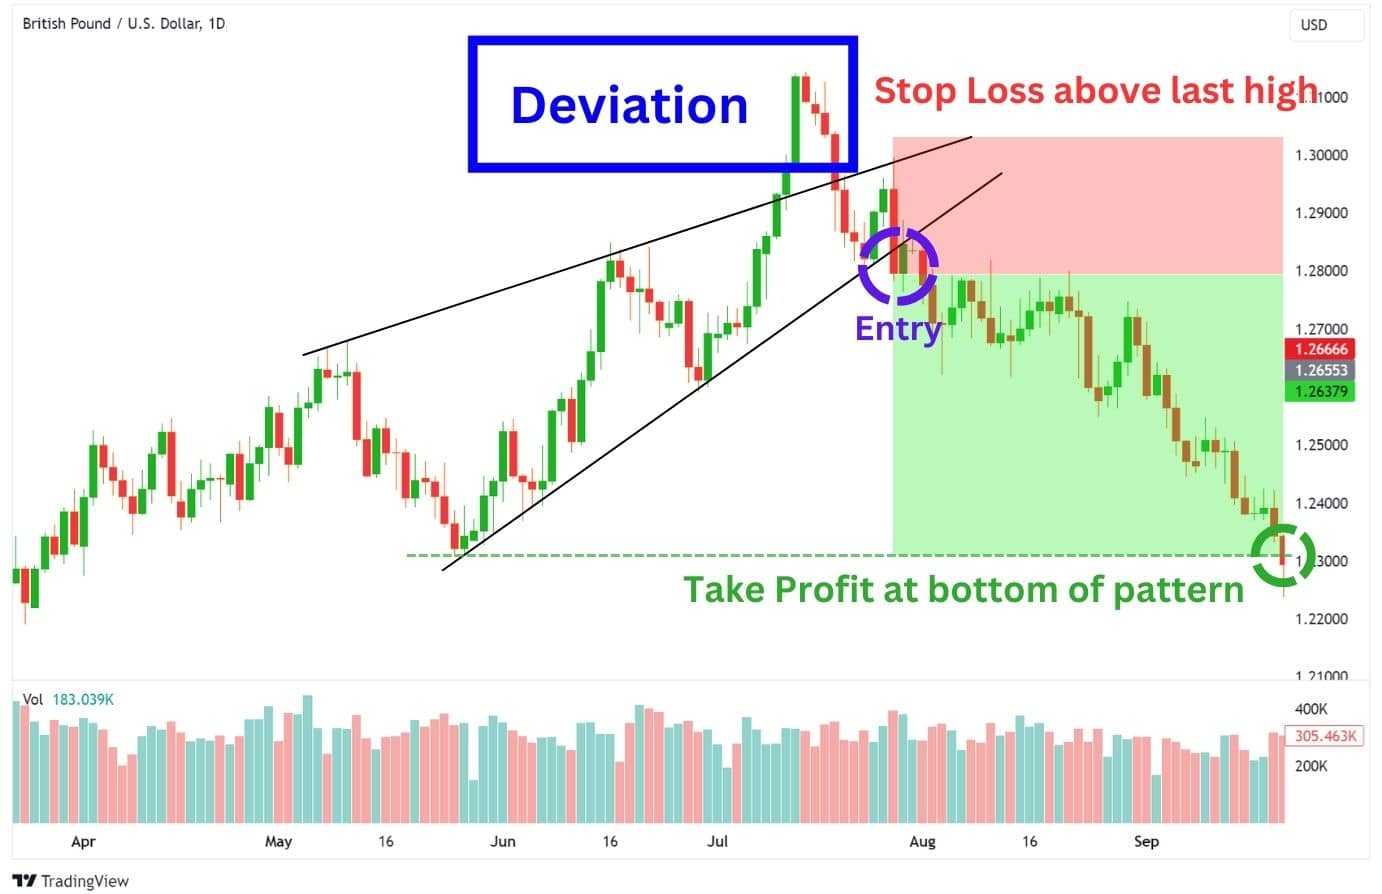 Chart example of a rising wedge pattern with an upwards breakout as a deviation.